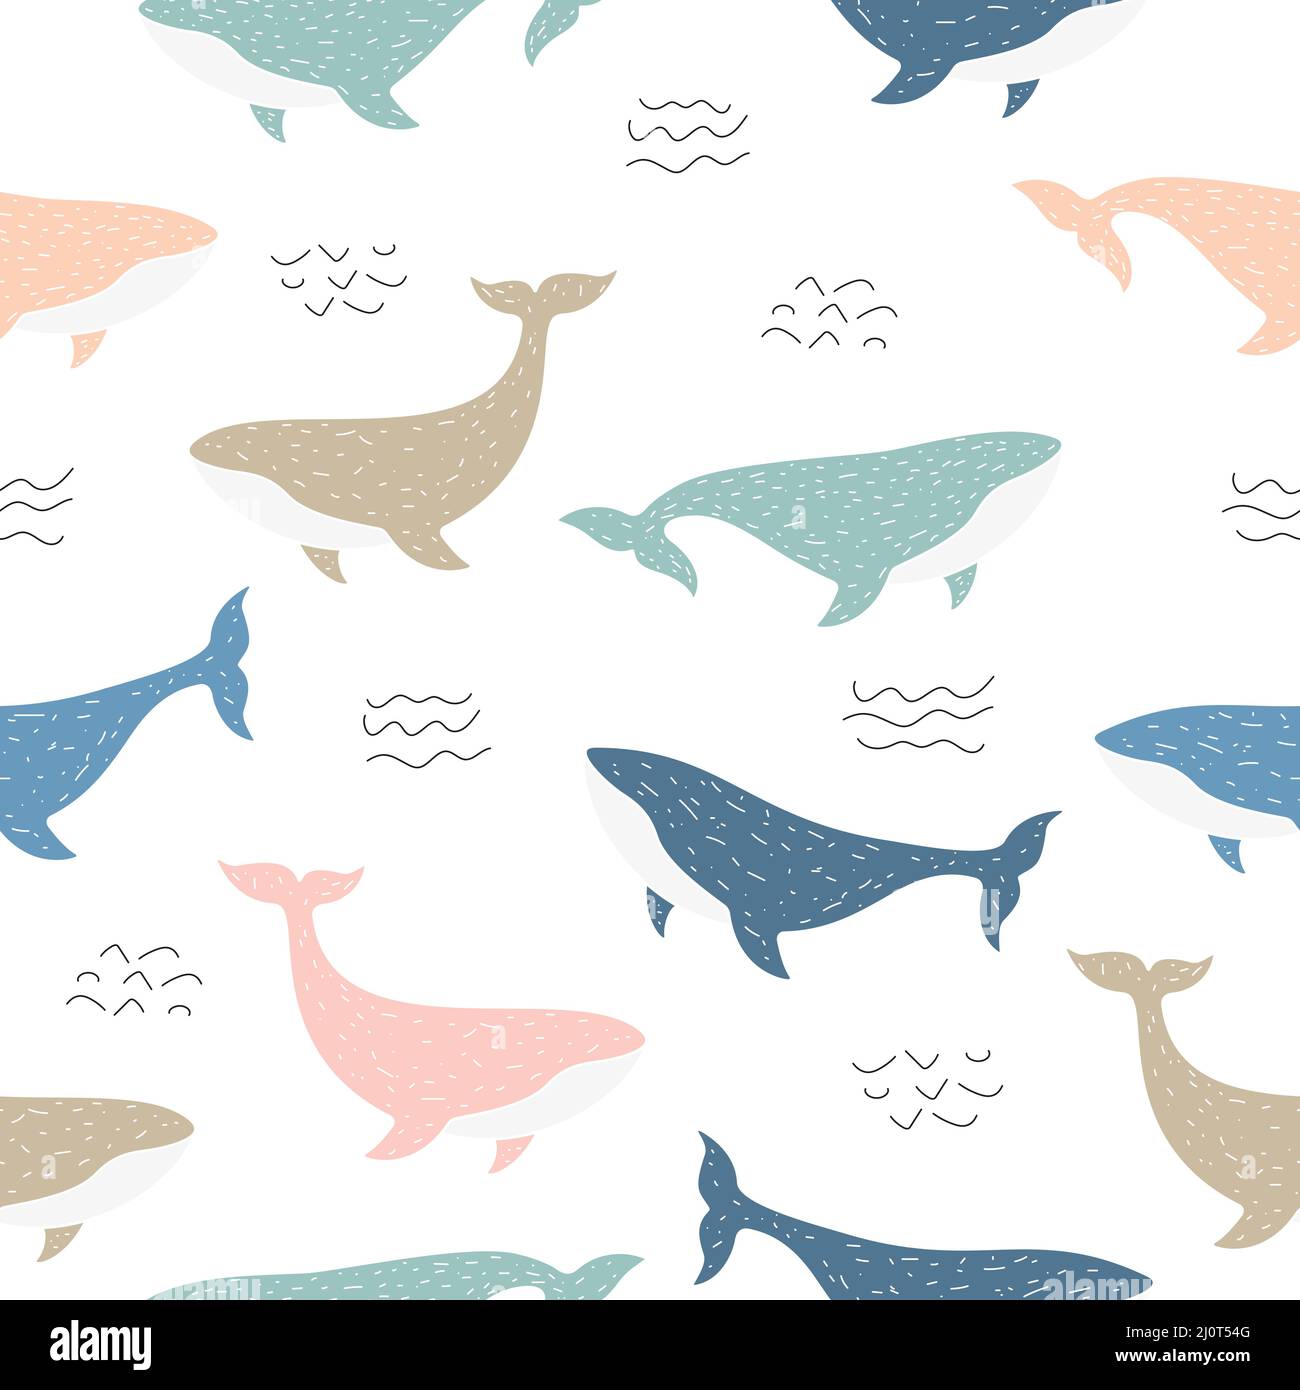 Childish seamless whales pattern. Cute kids pattern with ocean animals in Scandinavian style. Stock Vector